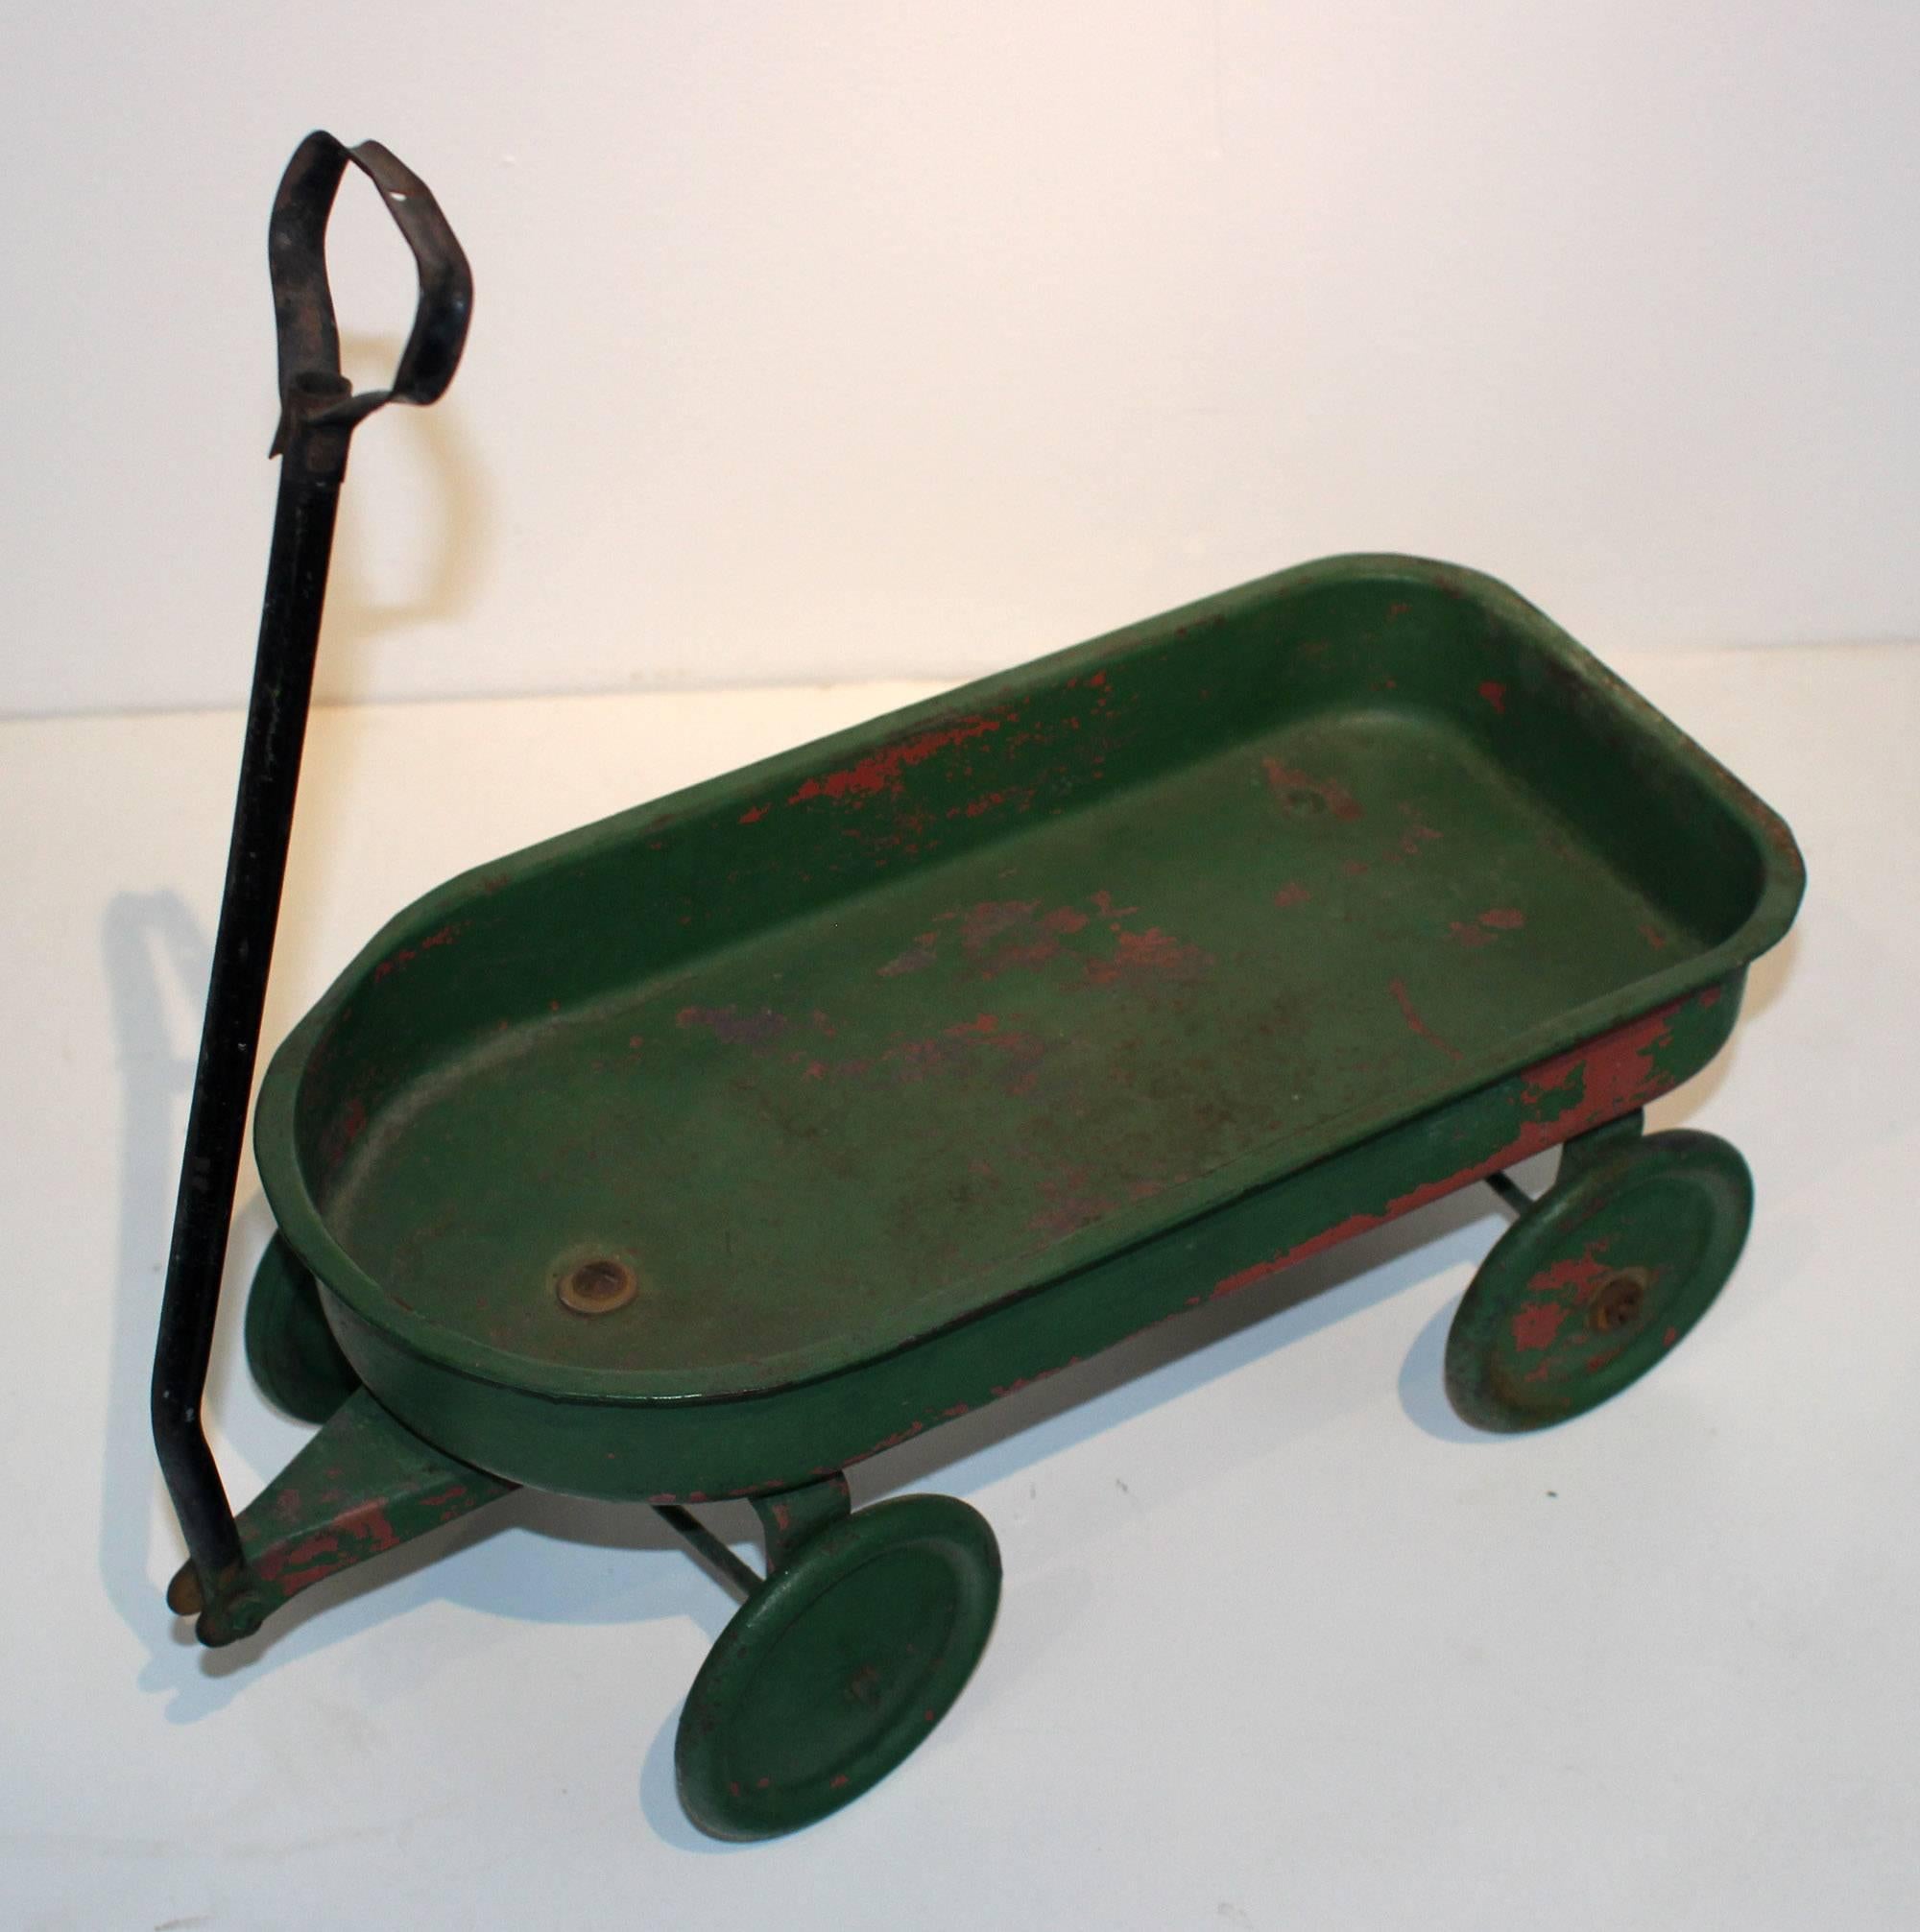 Cute little metal wagon painted in old green over red paint. American, early to mid-20th century. The noted measurements are for the body of the wagon; the handle is 15